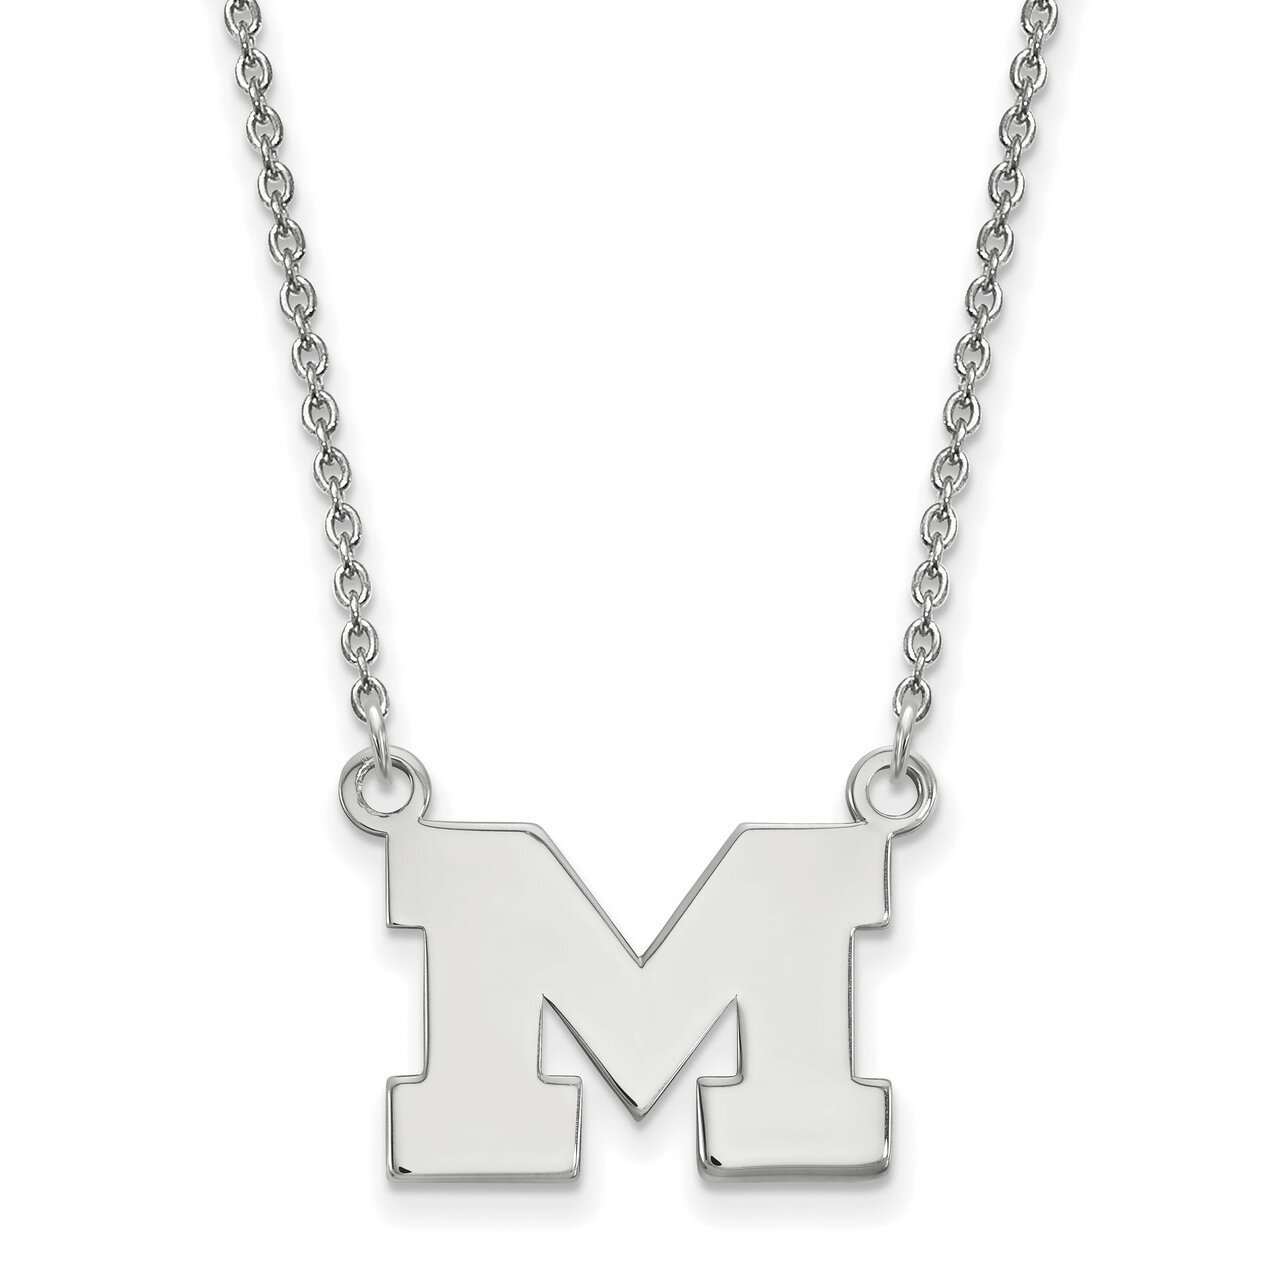 Michigan University of Small Pendant with Necklace 14k White Gold 4W015UM-18